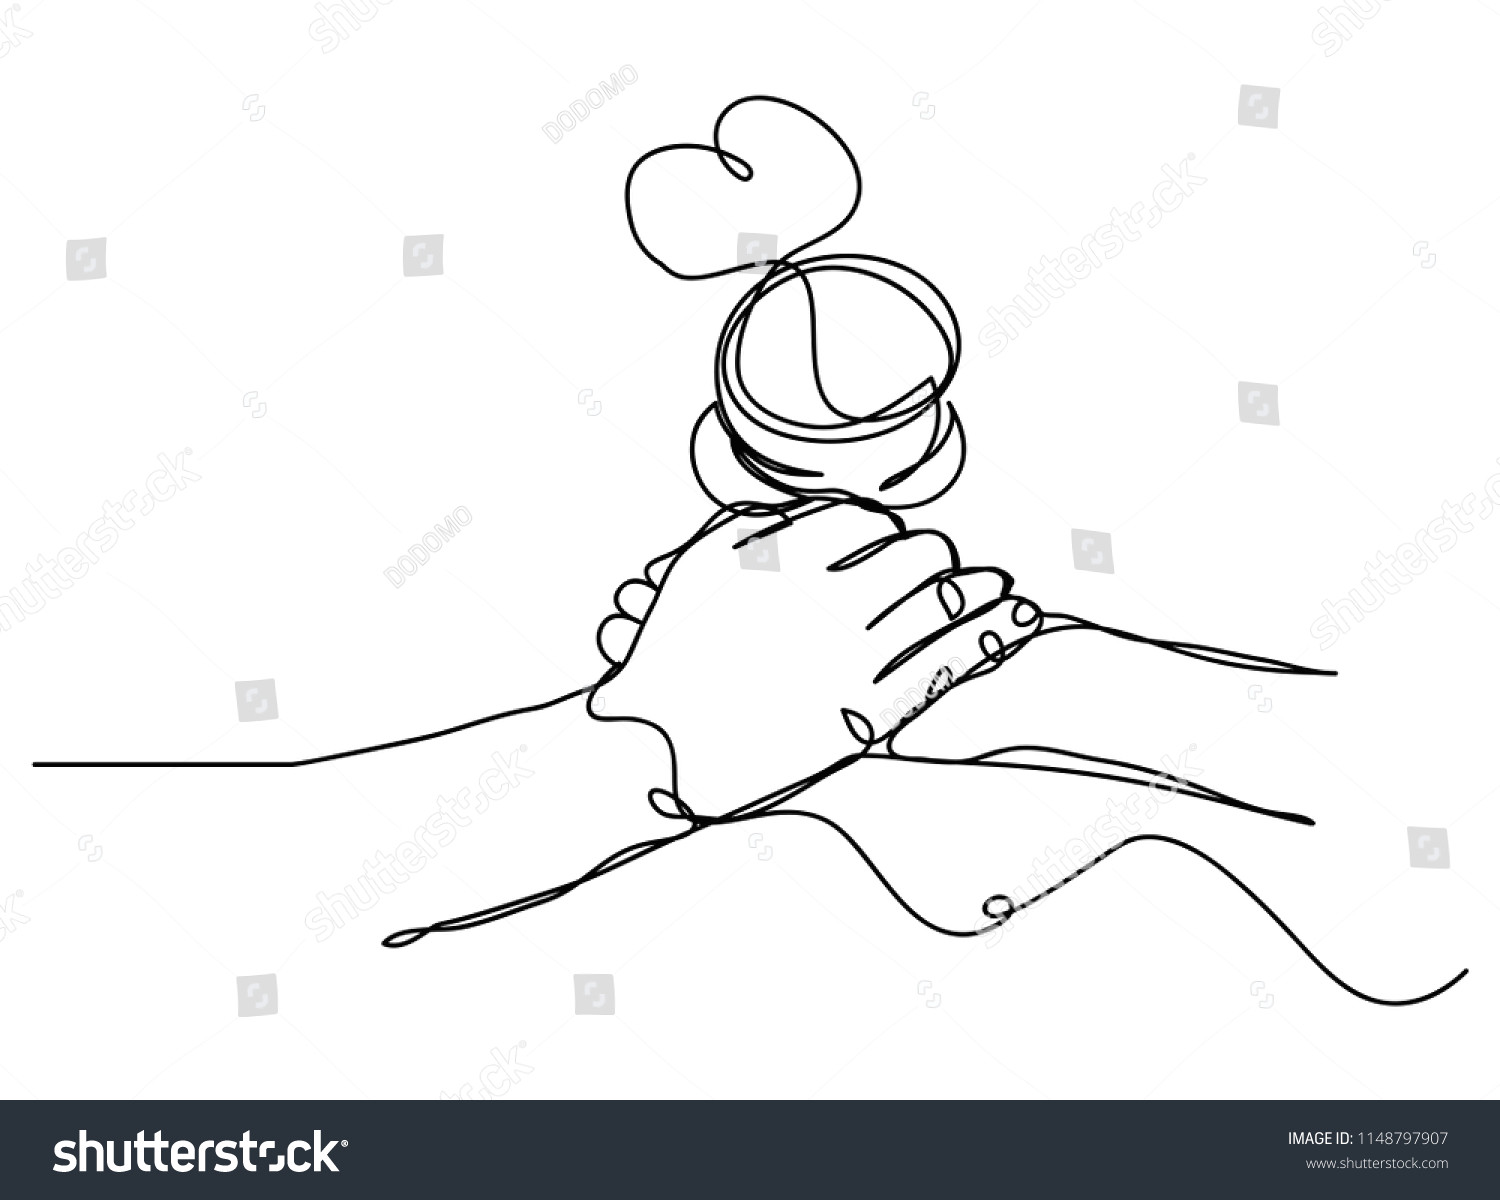 Drawings Of Men S Hands Continuous Line Drawing Men Women Hand Stock Vector Royalty Free